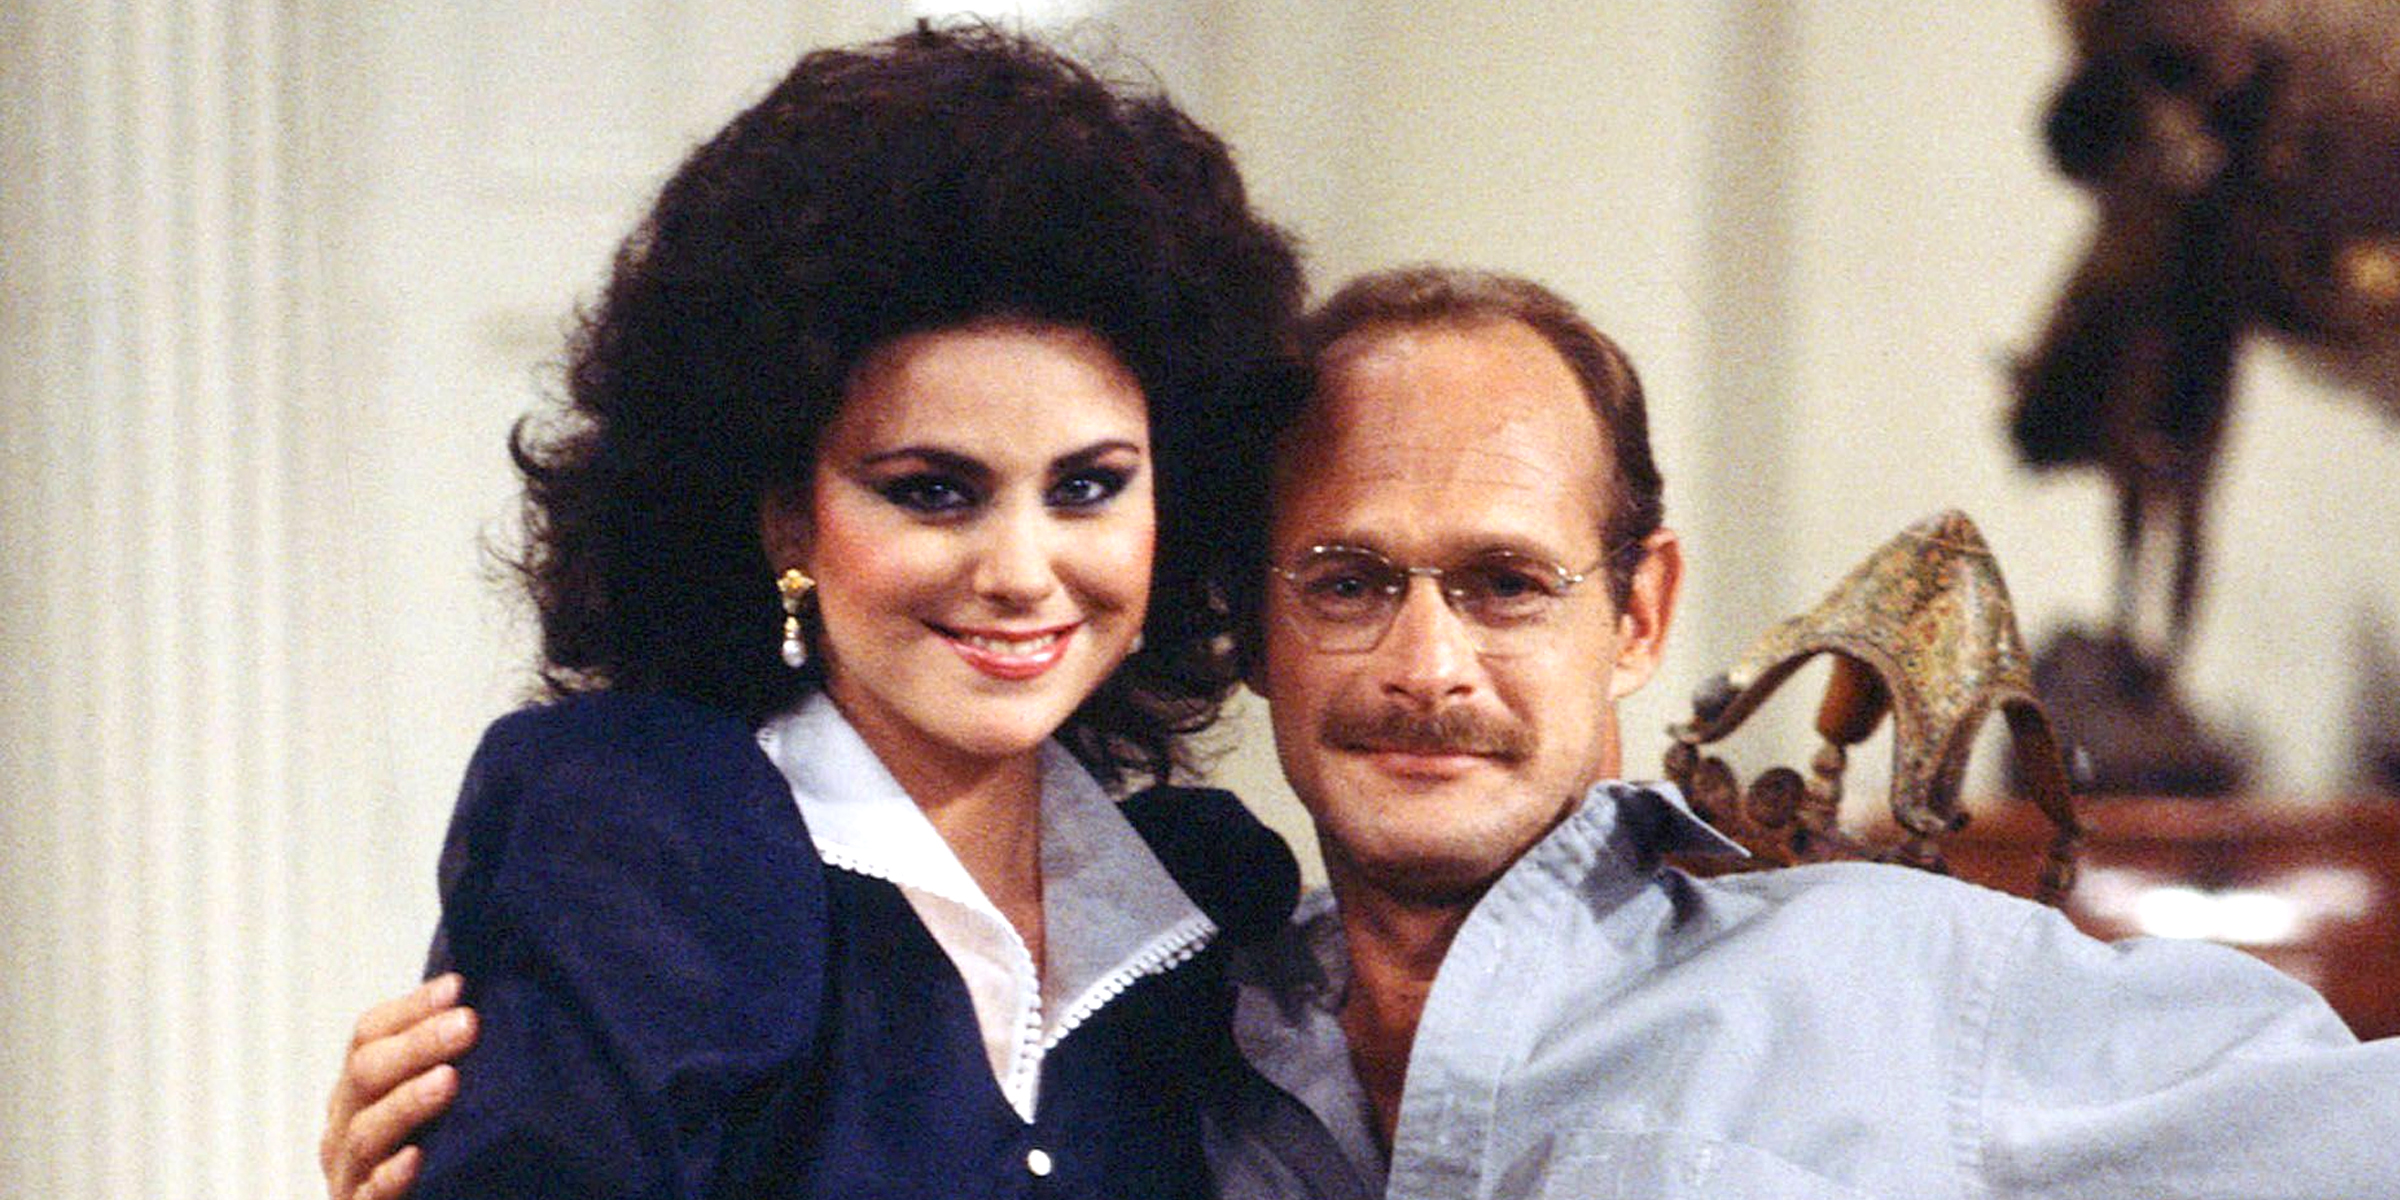 Delta Burke and Gerald McRaney | Source: Getty Images